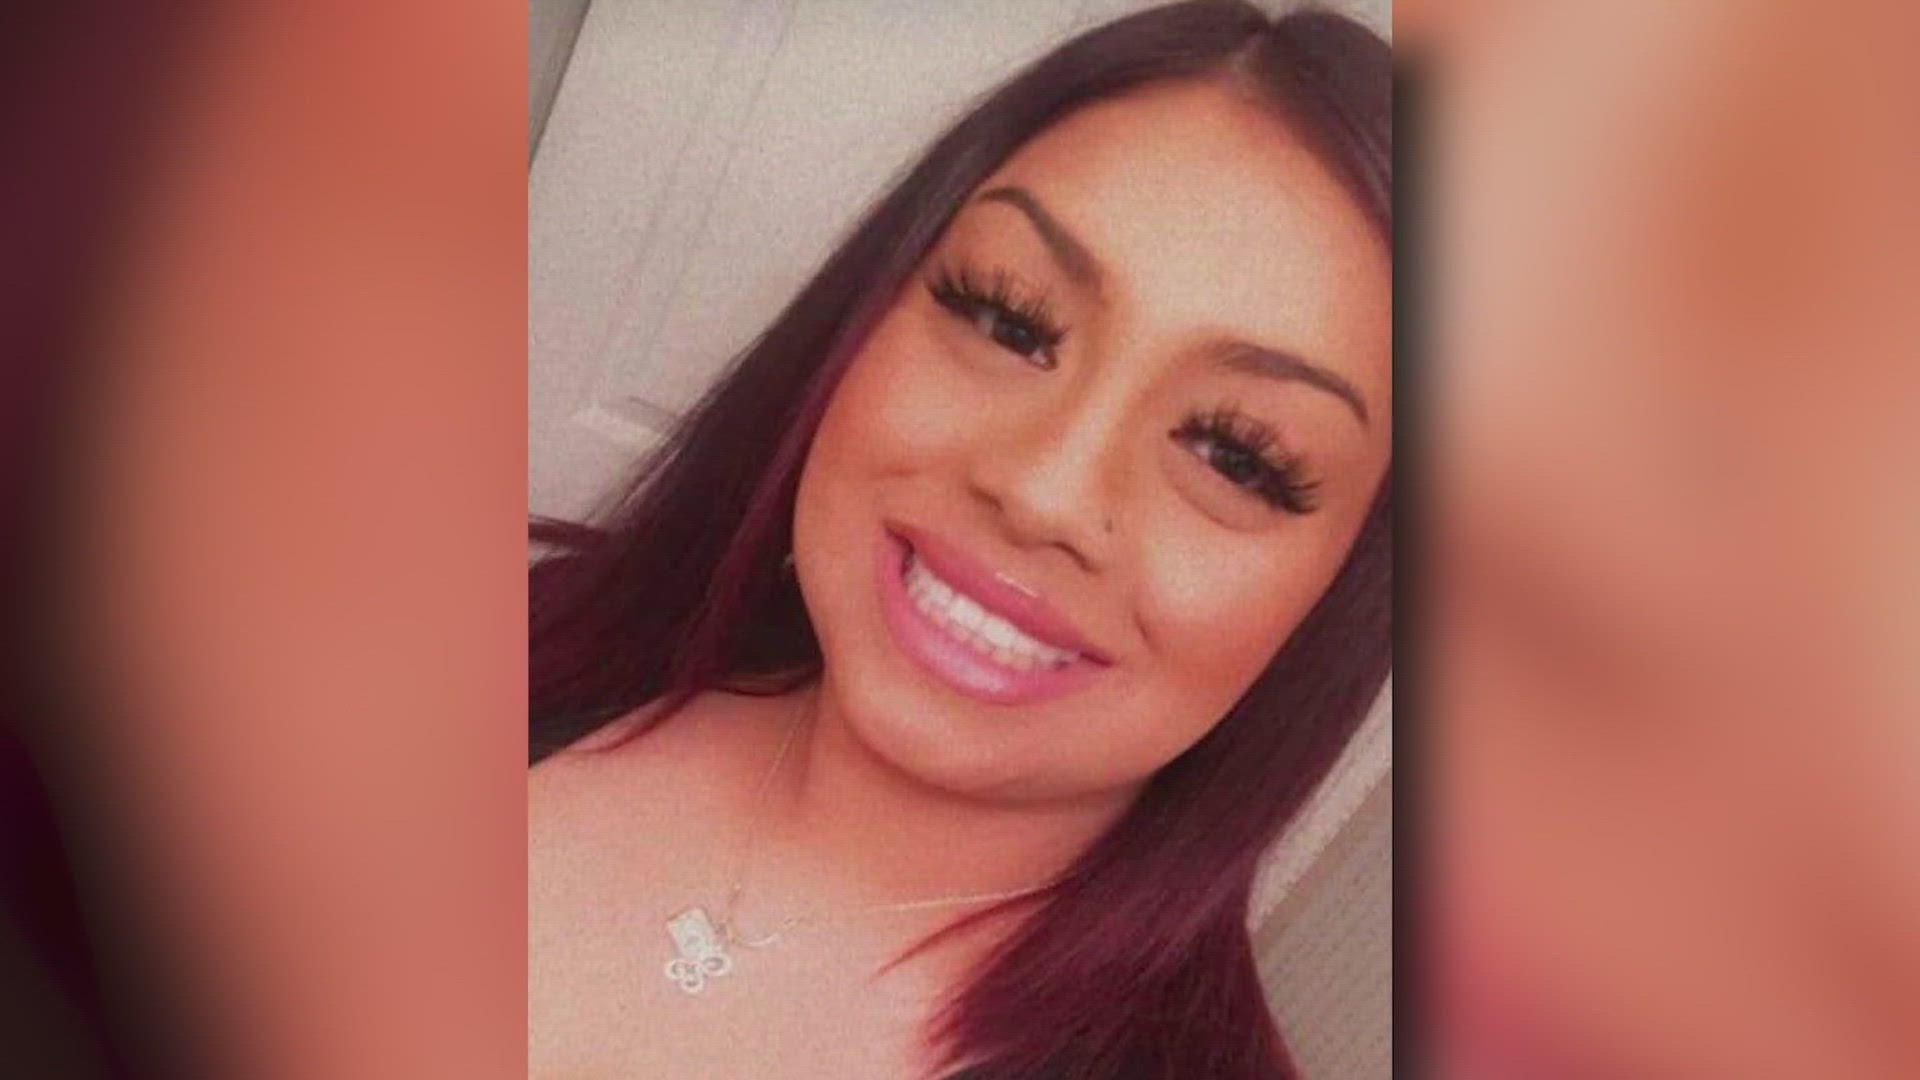 Investigators said 24-year-old Miranda Gomez was shot and killed on February 18 around 5 a.m. off the 4300 block of Roland Avenue.